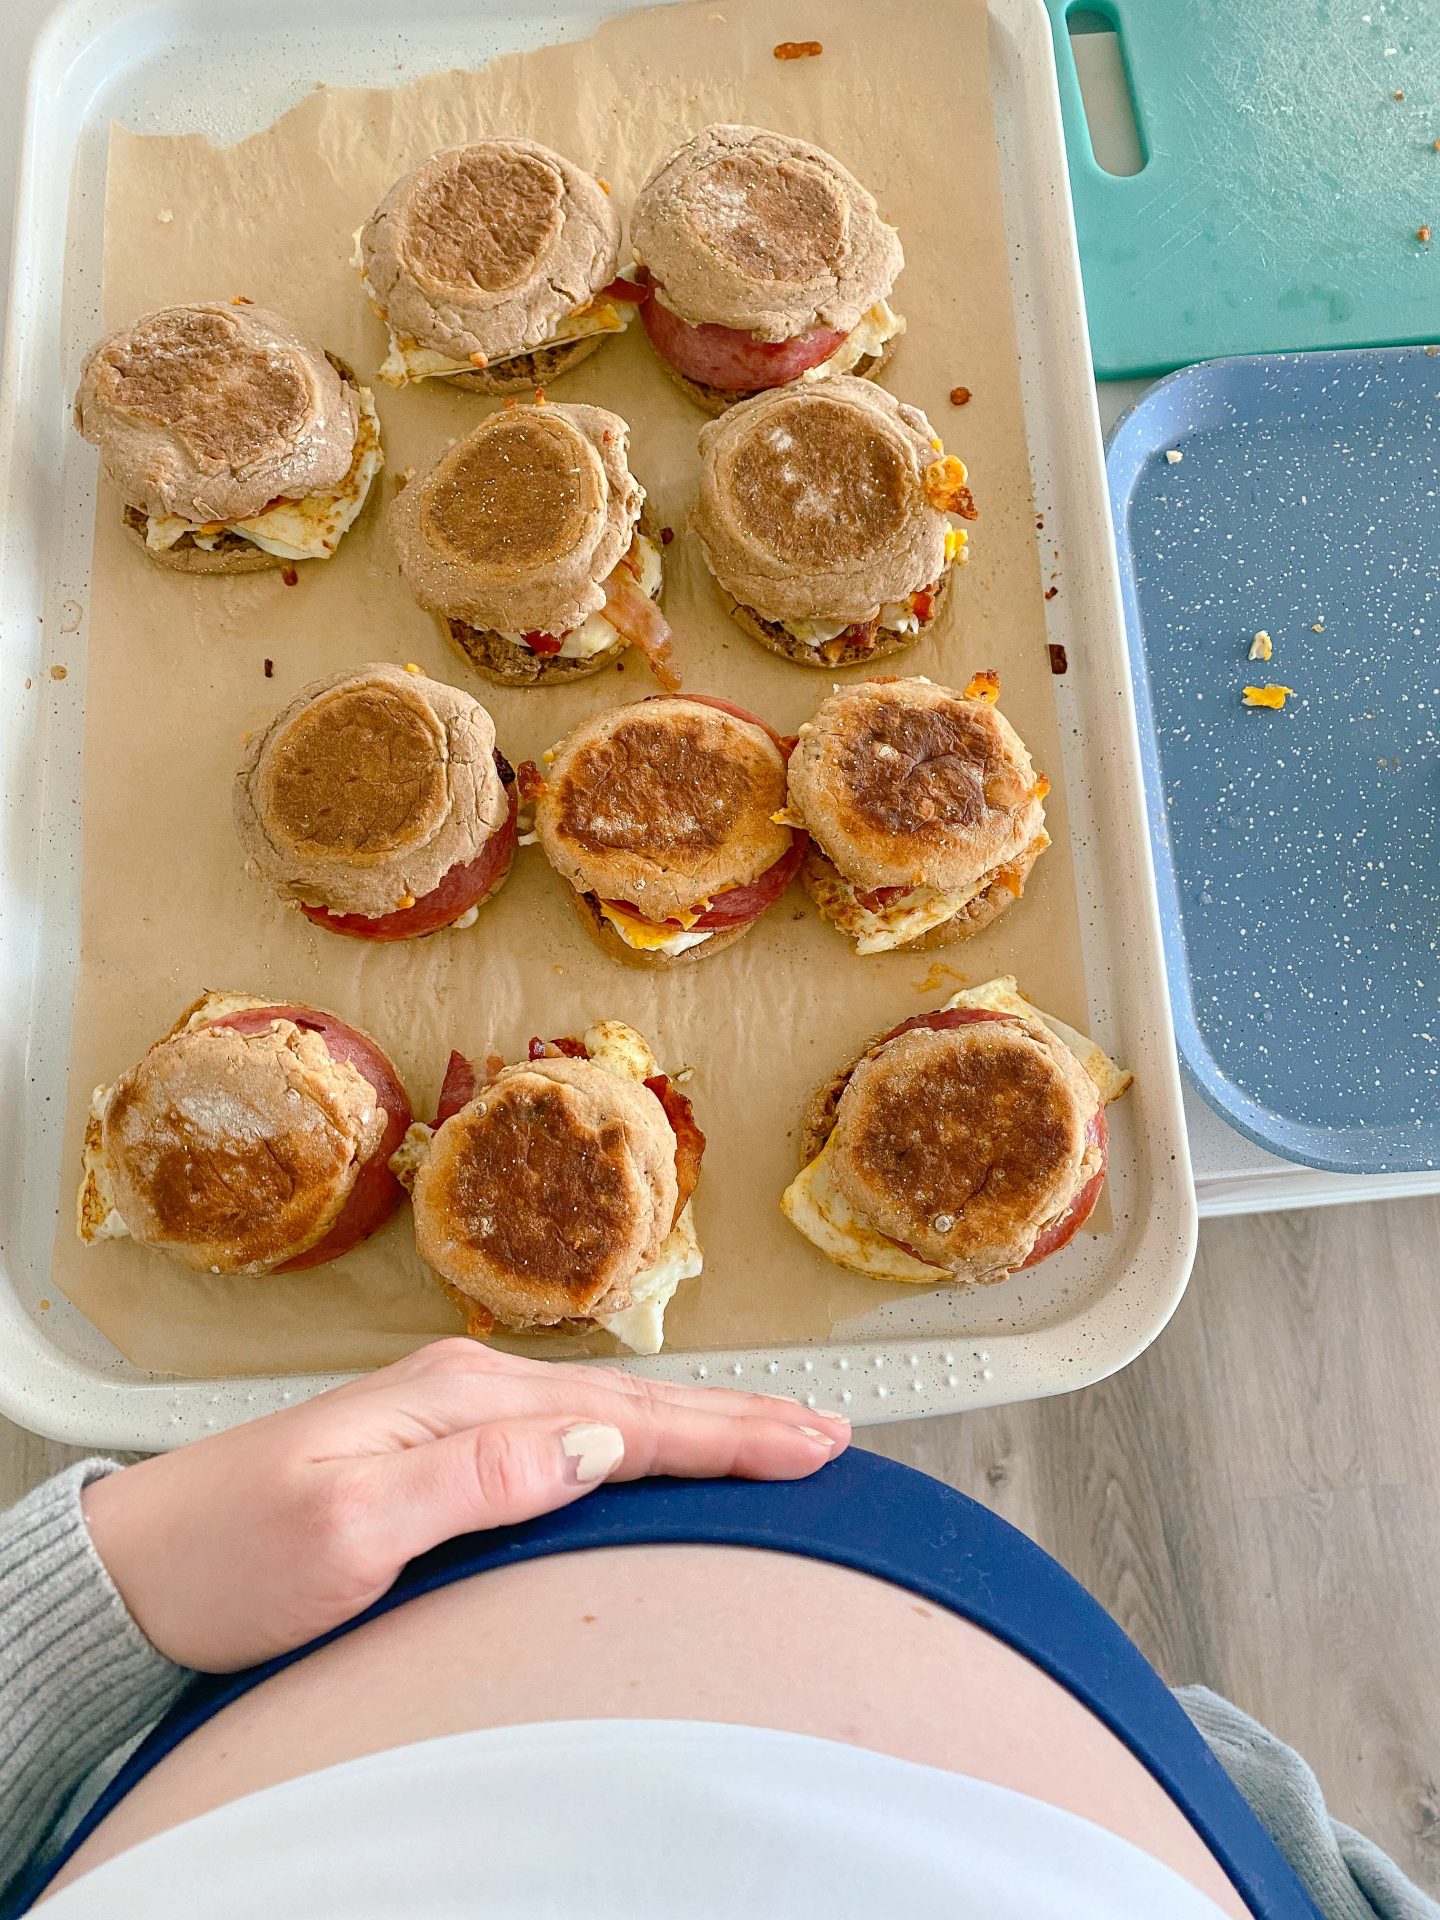 breakfast sandwiches, breakfast sandwich, meal prep, bacon, egg, cheese, easy to make, quick meals, quick breakfast idea, breakfast idea meal prepping, English muffins, over easy eggs, prep on Sunday, healthy meals, healthy recipes, on the go